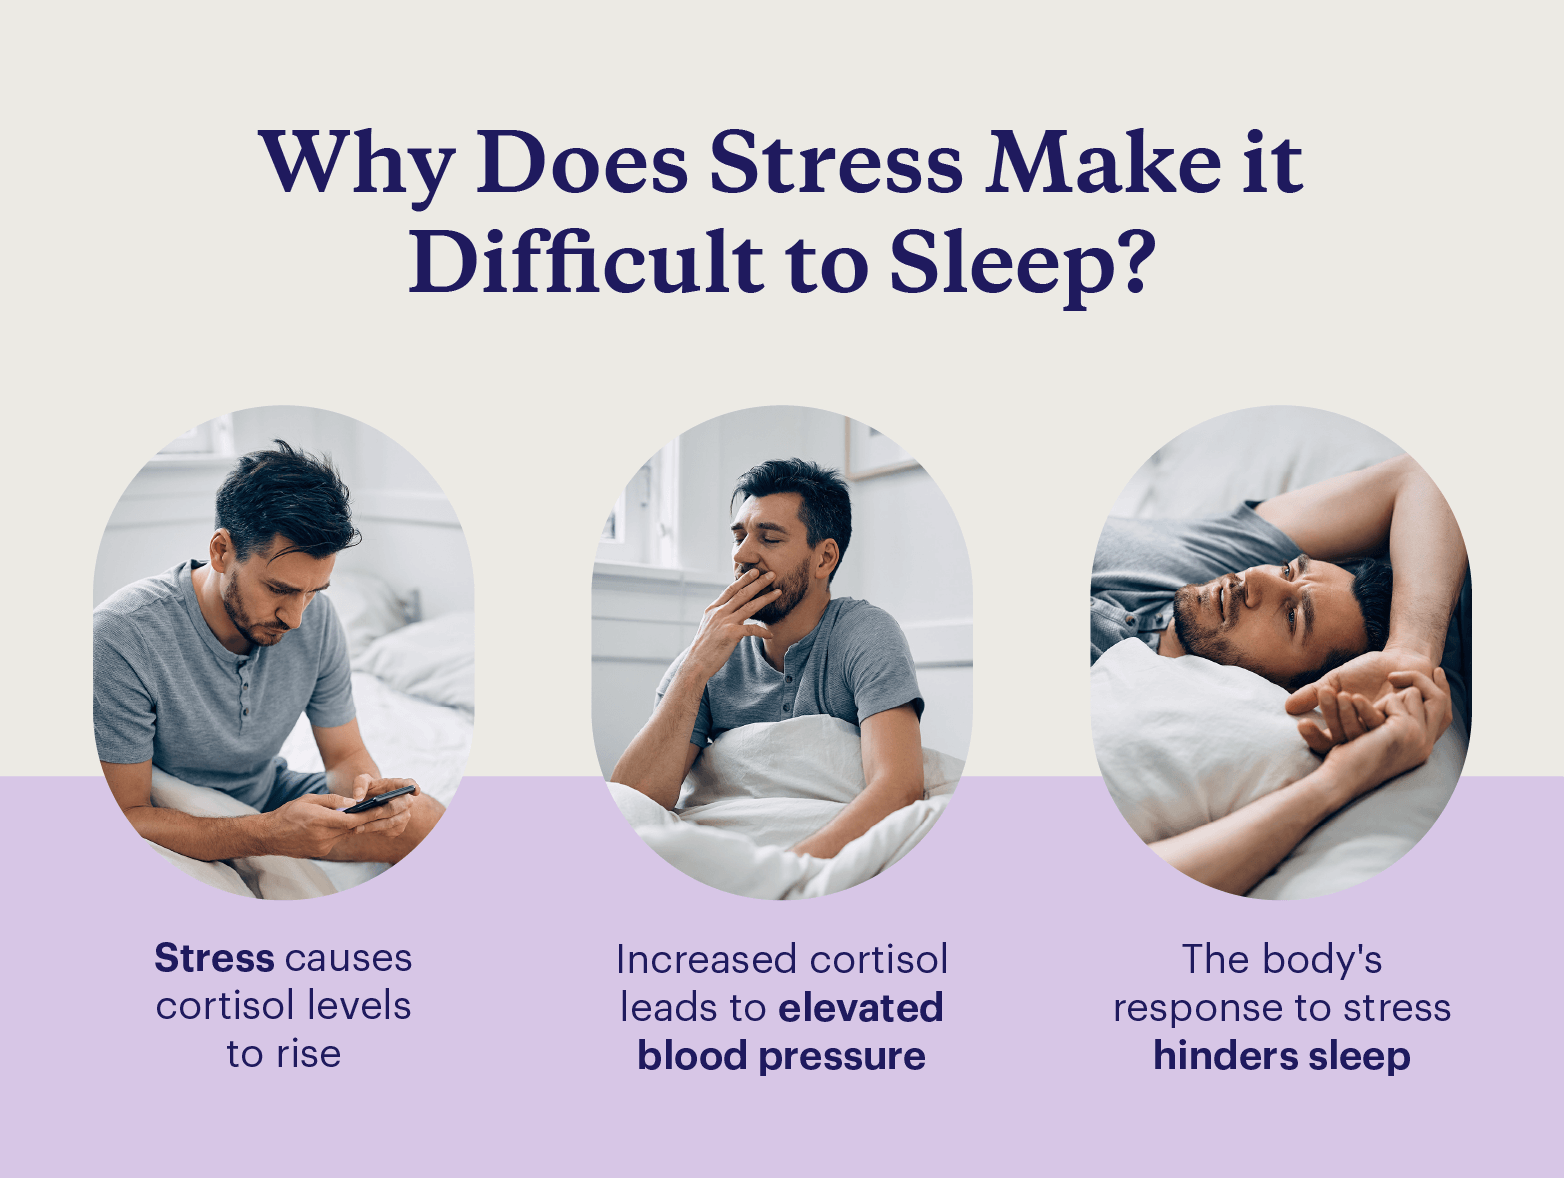 Three reasons stress makes it difficult to sleep.